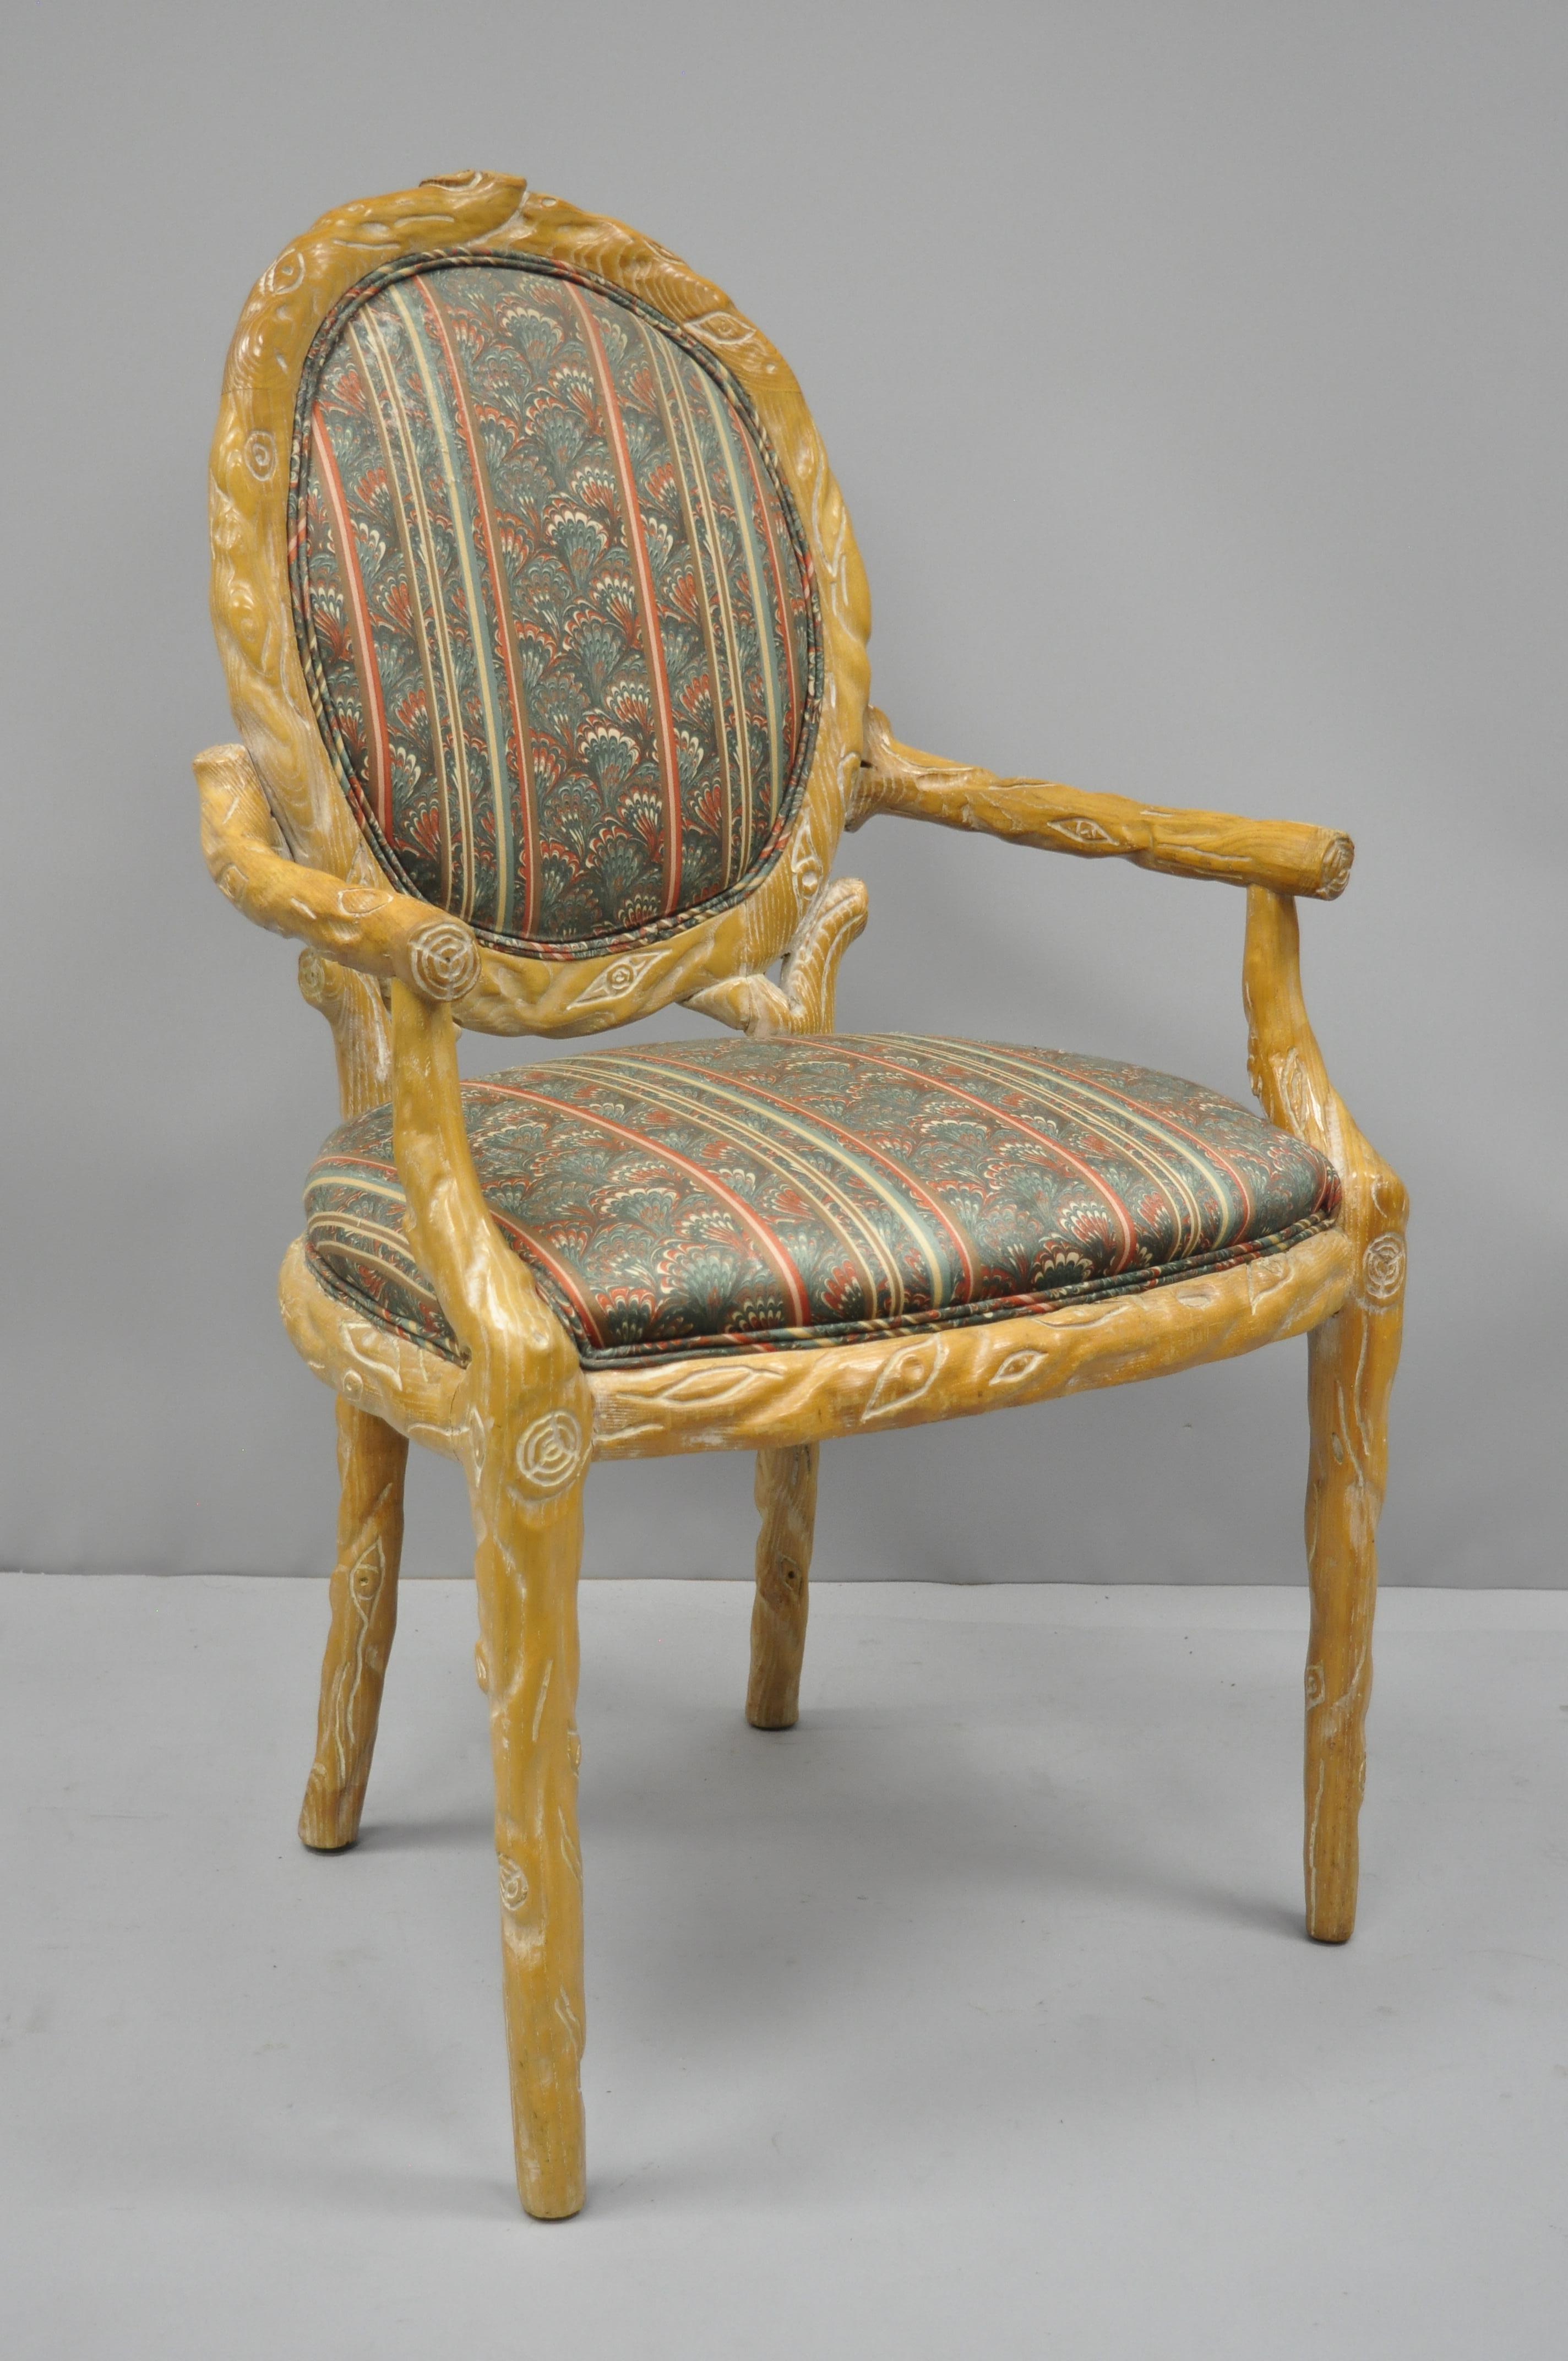 Vintage faux Bois upholstered armchair. Item features heavy solid wood construction, nicely carved details, tapered legs, blue striped fabric, and quality American craftsmanship, circa mid-late 20th century. Measurements: 39.5